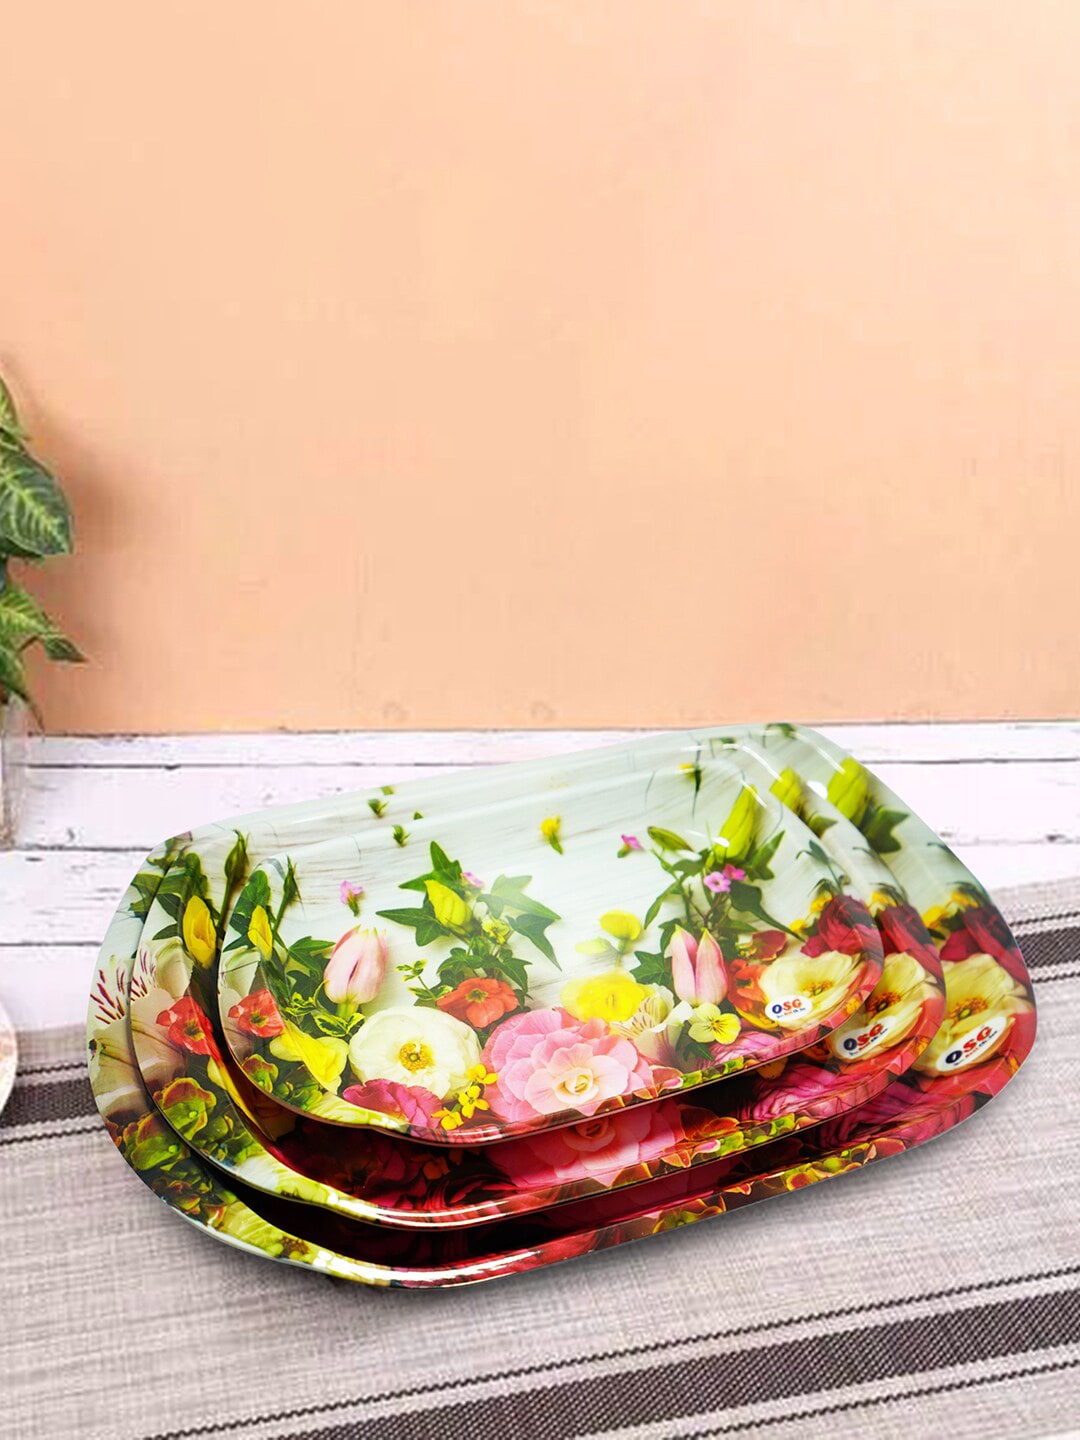 Gallery99 Set Of 3 White & Pink Floral Printed Serving Trays Price in India